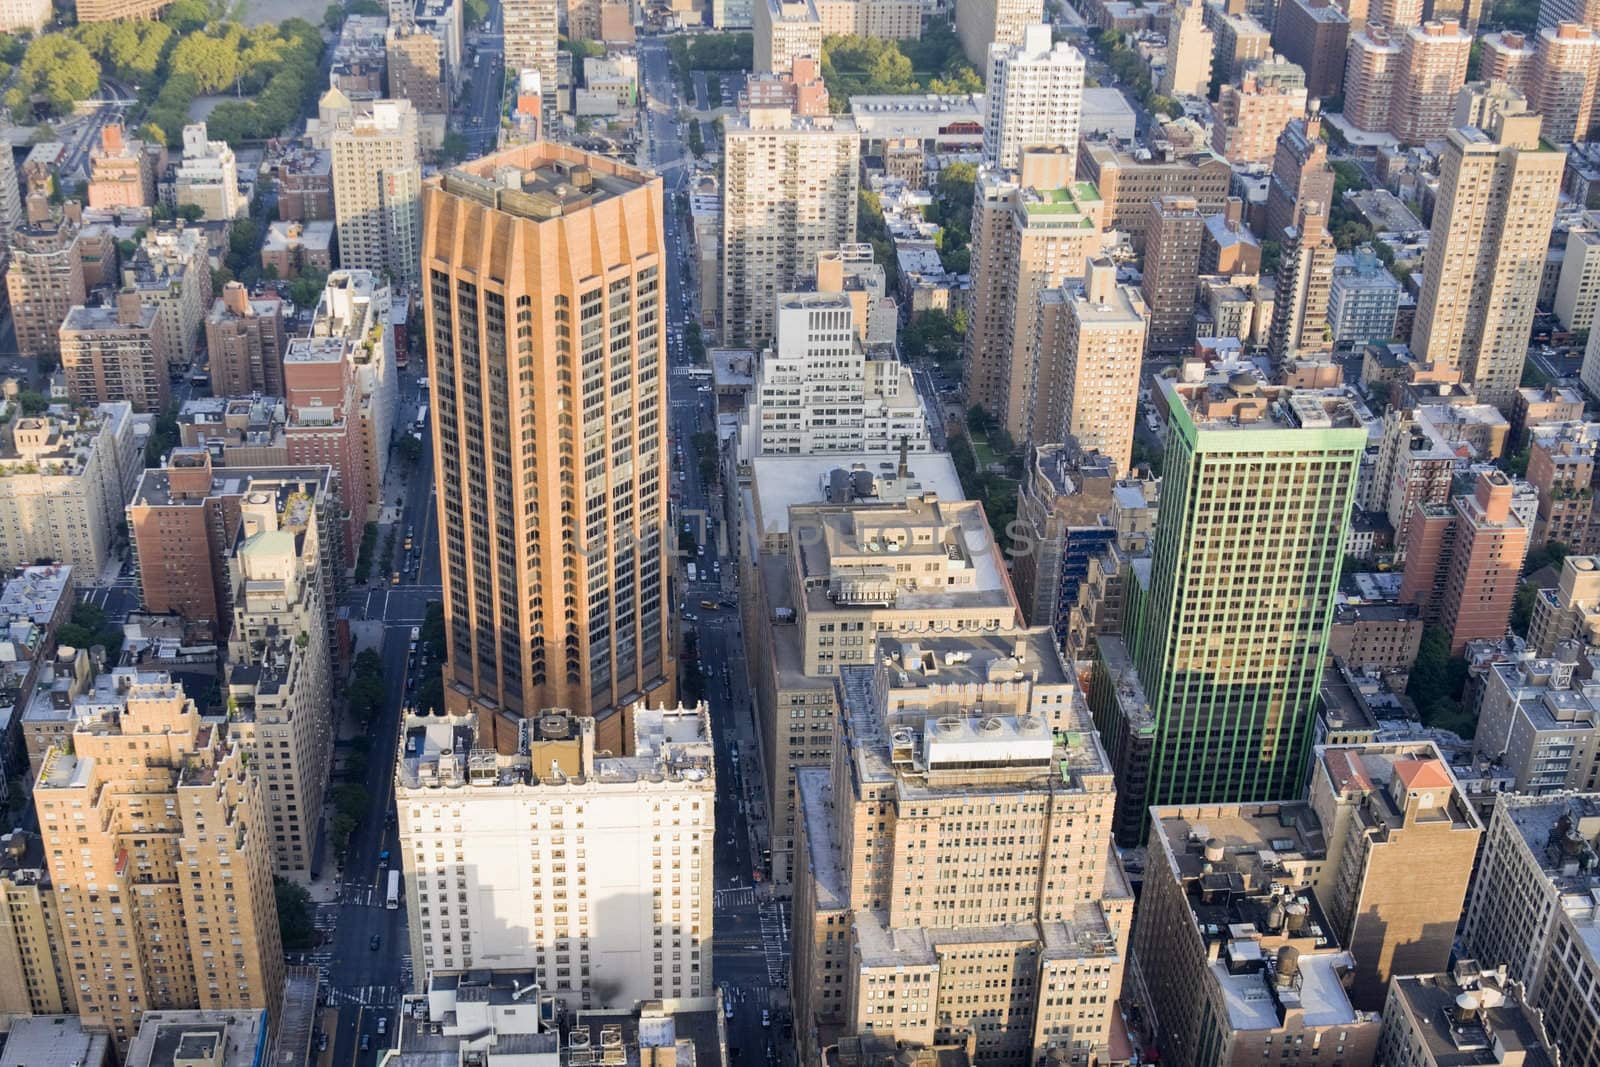 Aerial view of the buildings of manhattan.